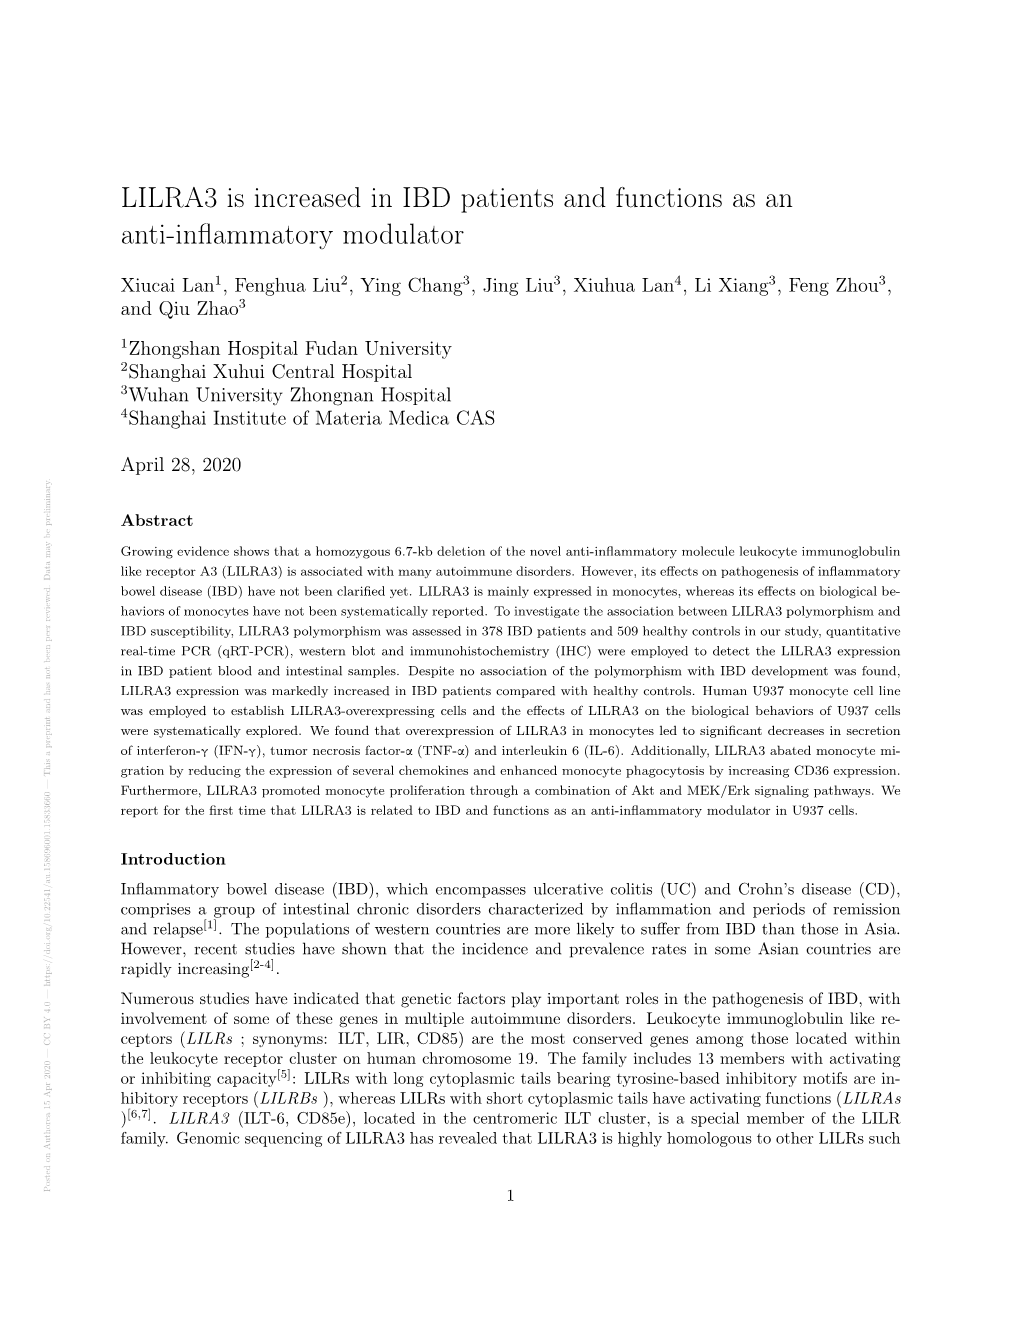 LILRA3 Is Increased in IBD Patients and Functions As an Anti